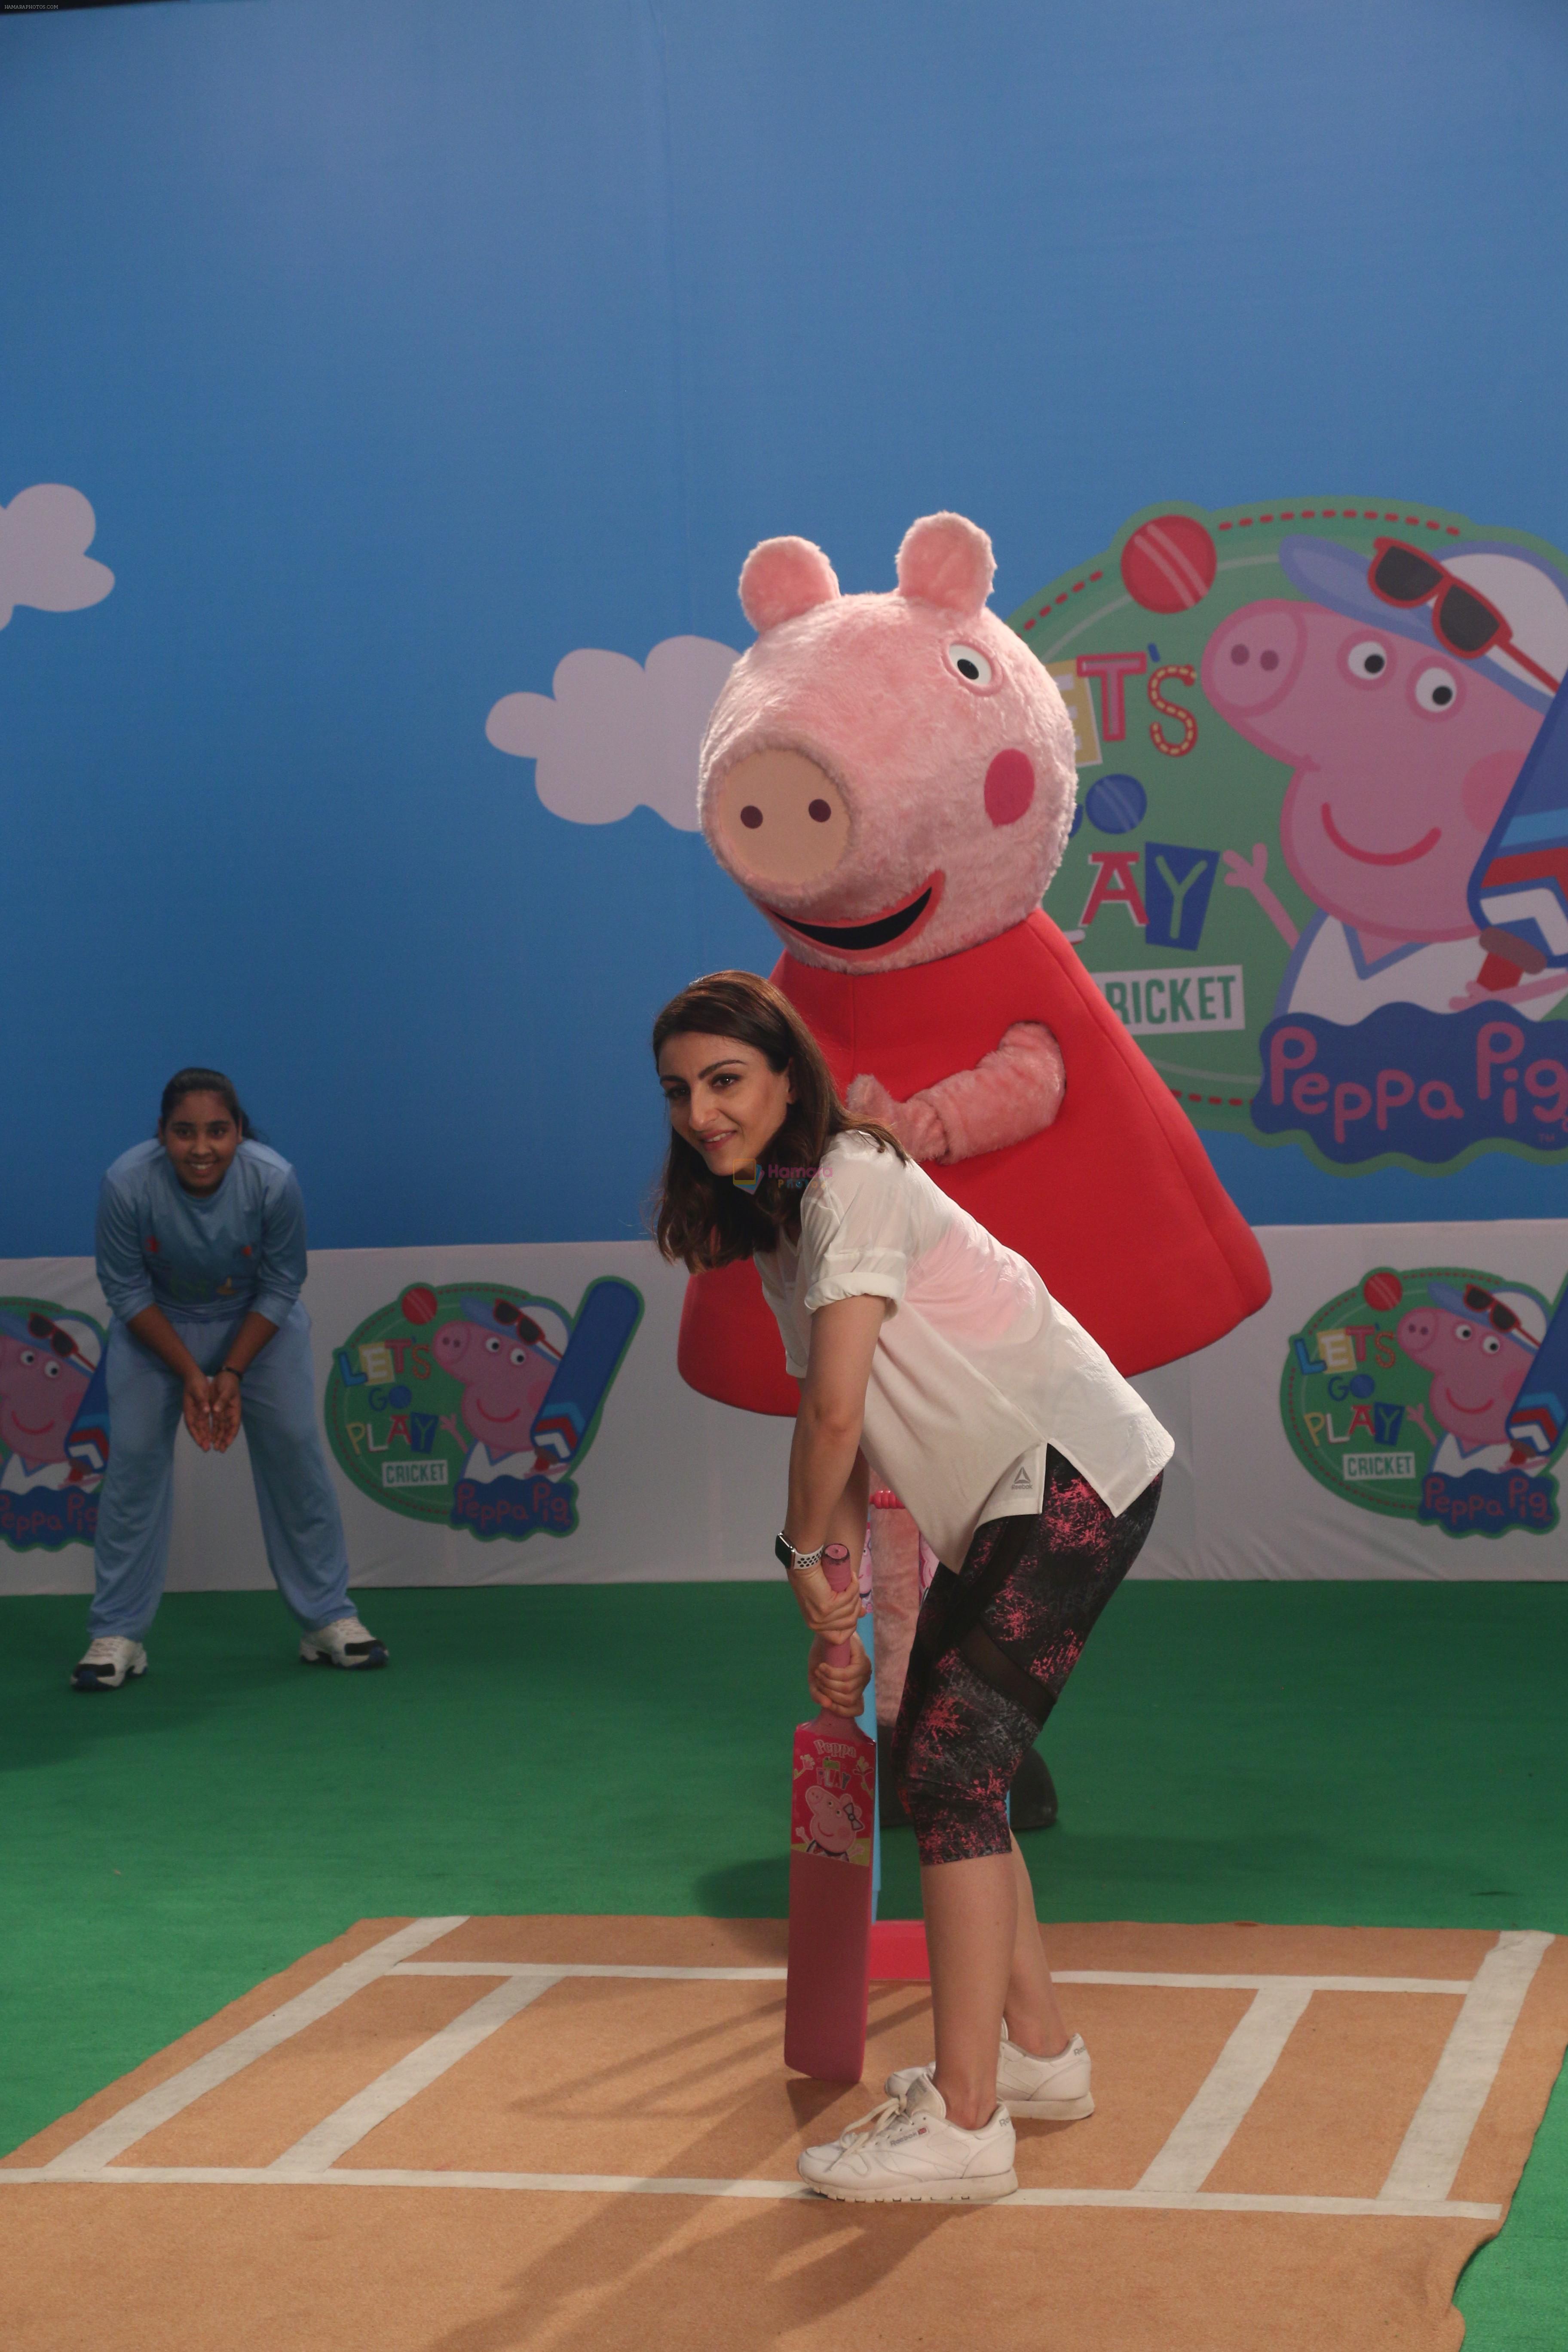 Soha Ali Khan shooting fun cricket videos with kids� favourite, Peppa Pig and George on 22nd June 2019